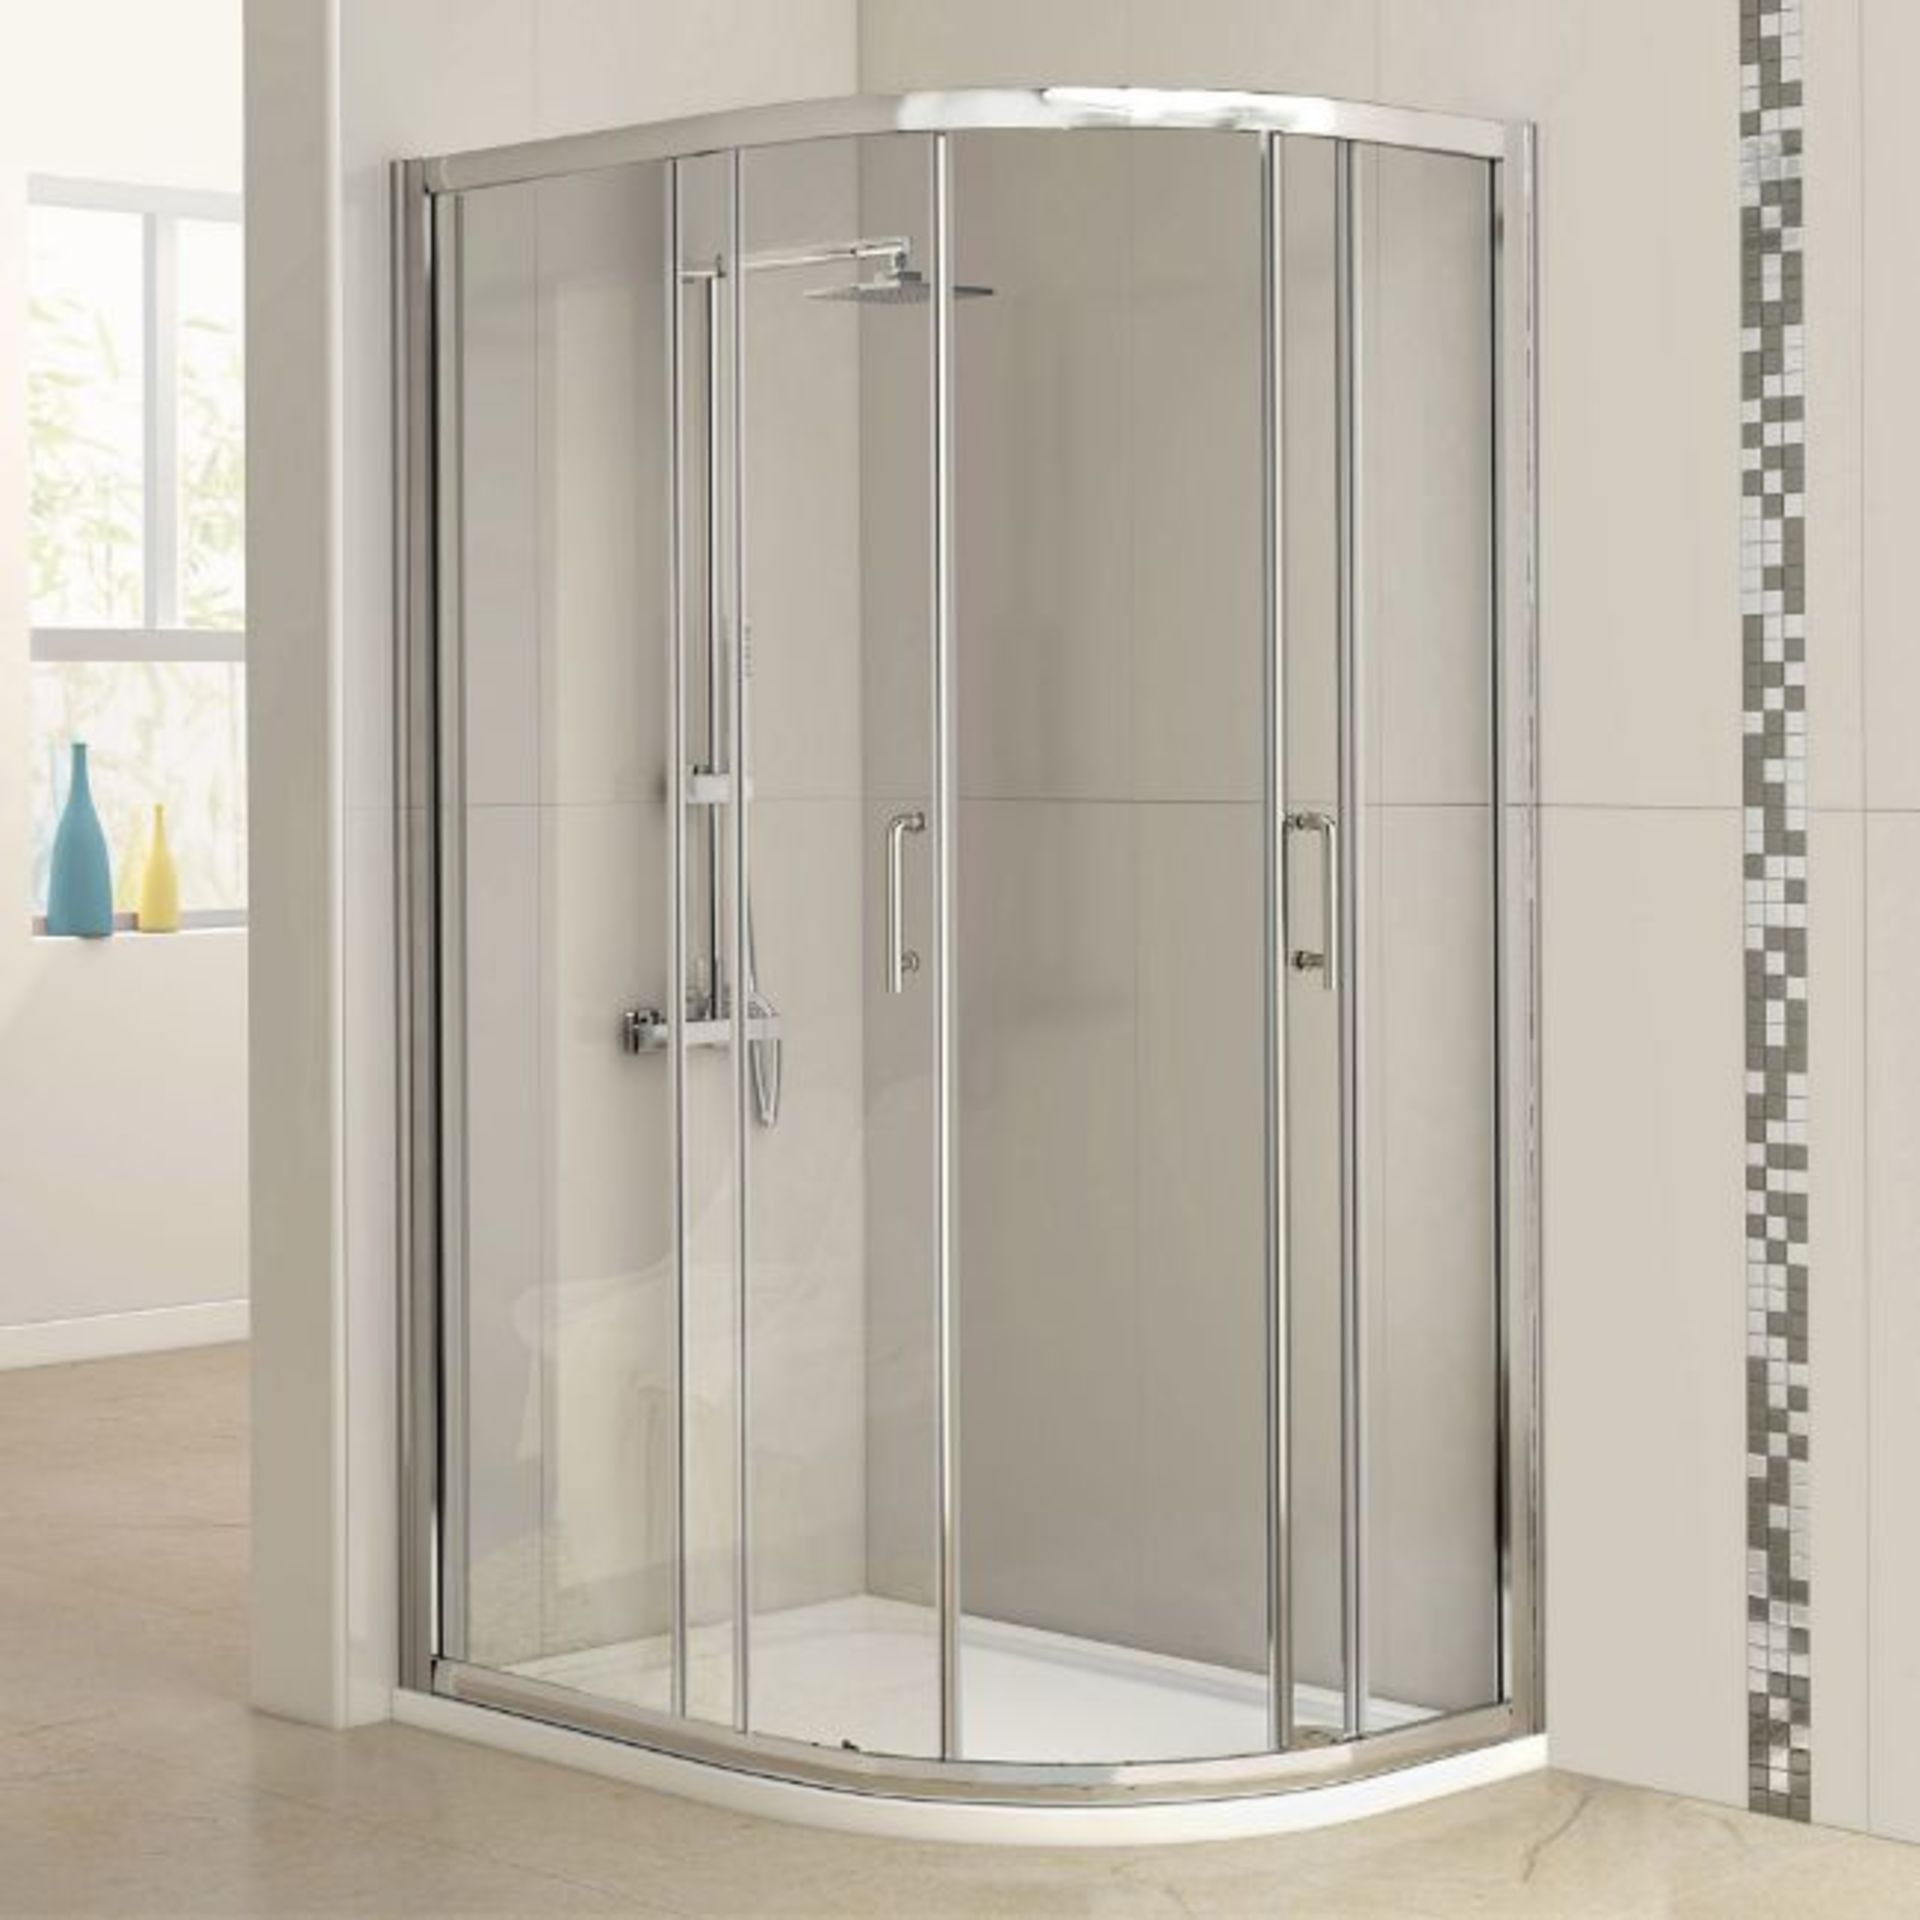 New 1200x900mm - 6mm - Offset 2 Door Quadrant Shower Enclosure. RRP £599.99..Make The Most Of That